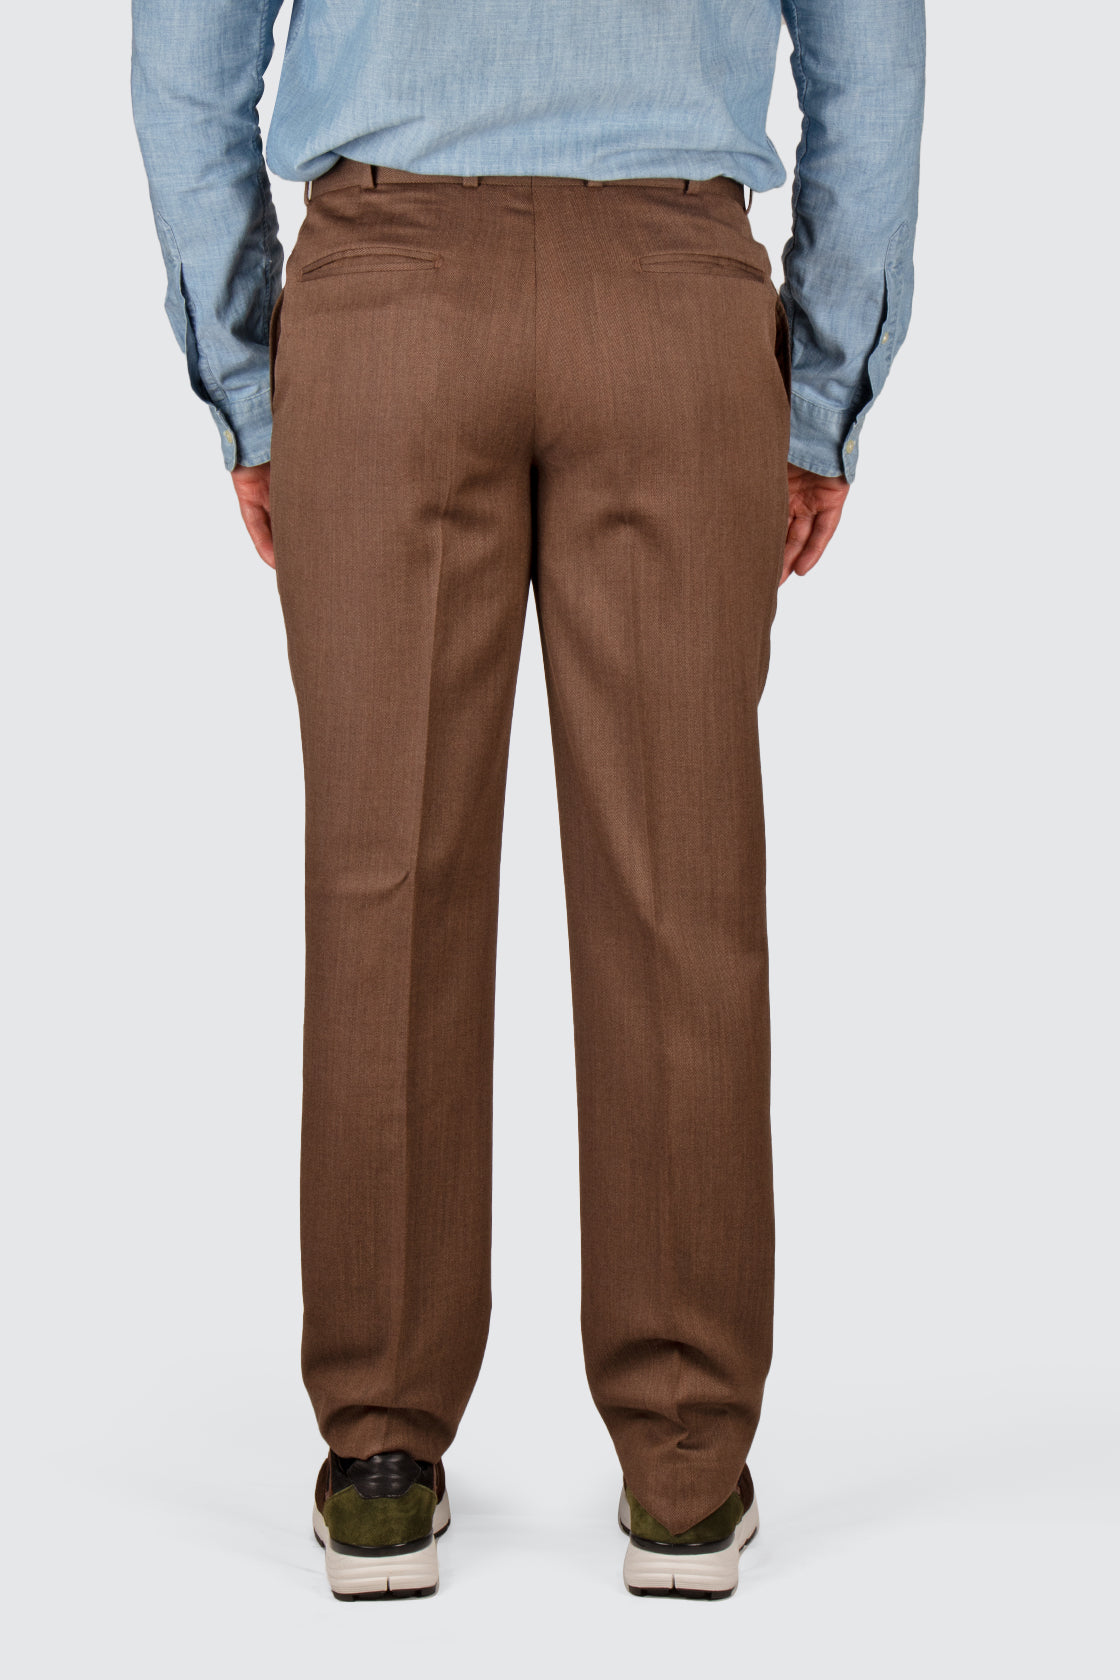 Rembrandt Lotus Wool Stretch Trouser Brown